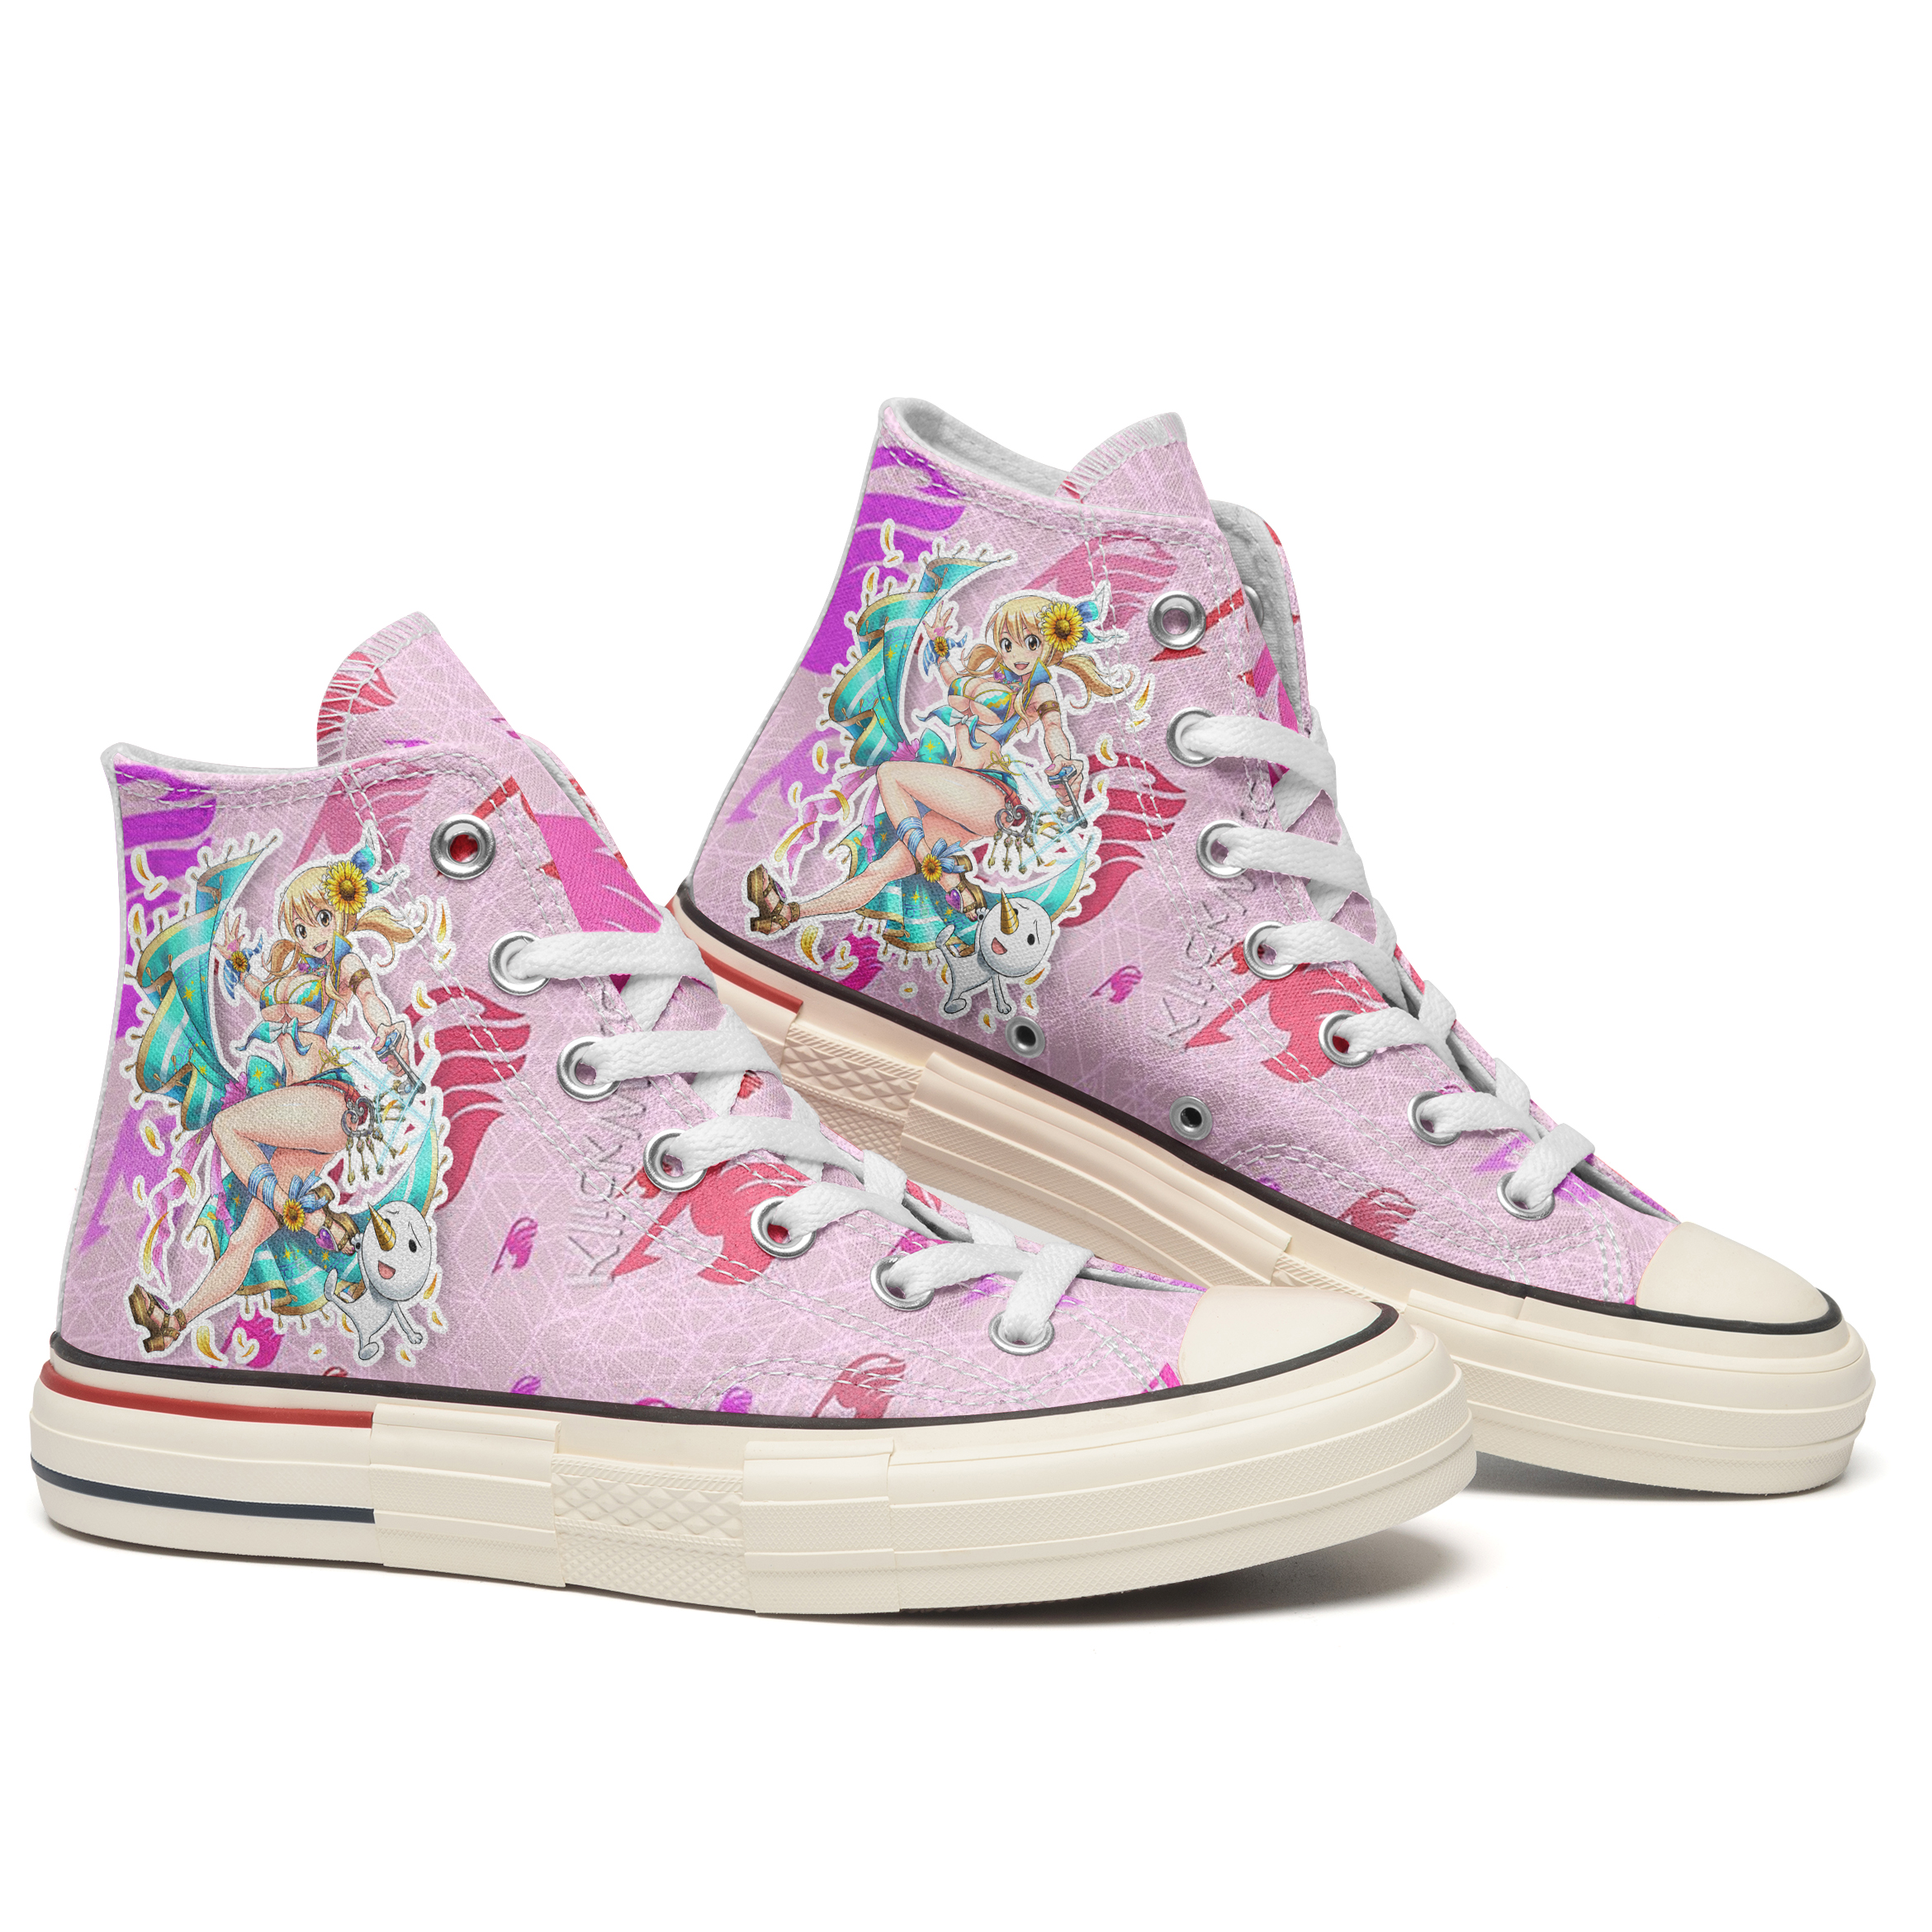 Gilgamesh Fate High Top Canvas Shoes Special Edition